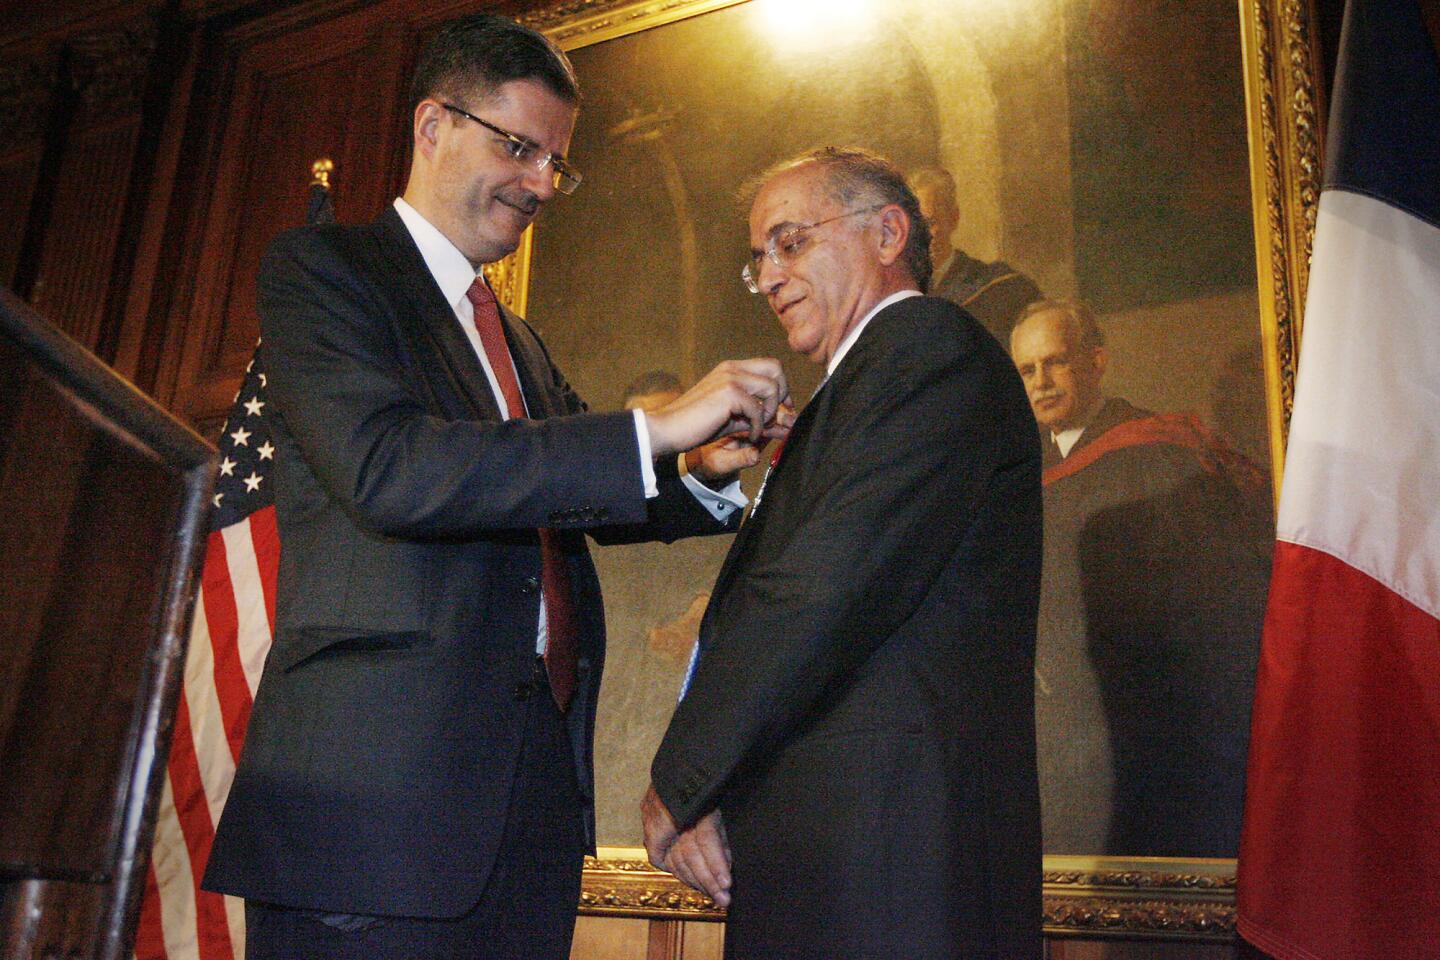 Ambassador of France, Francois Delattre, left, inducts Dr. Charles Elachi, director of NASA¿s Jet Propulsion Laboratory and vice president of the California Institute of Technology in Pasadena, into the Chevalier de la Legion d¿Honneur during a ceremony at Caltech on Tuesday, September 6, 2011.